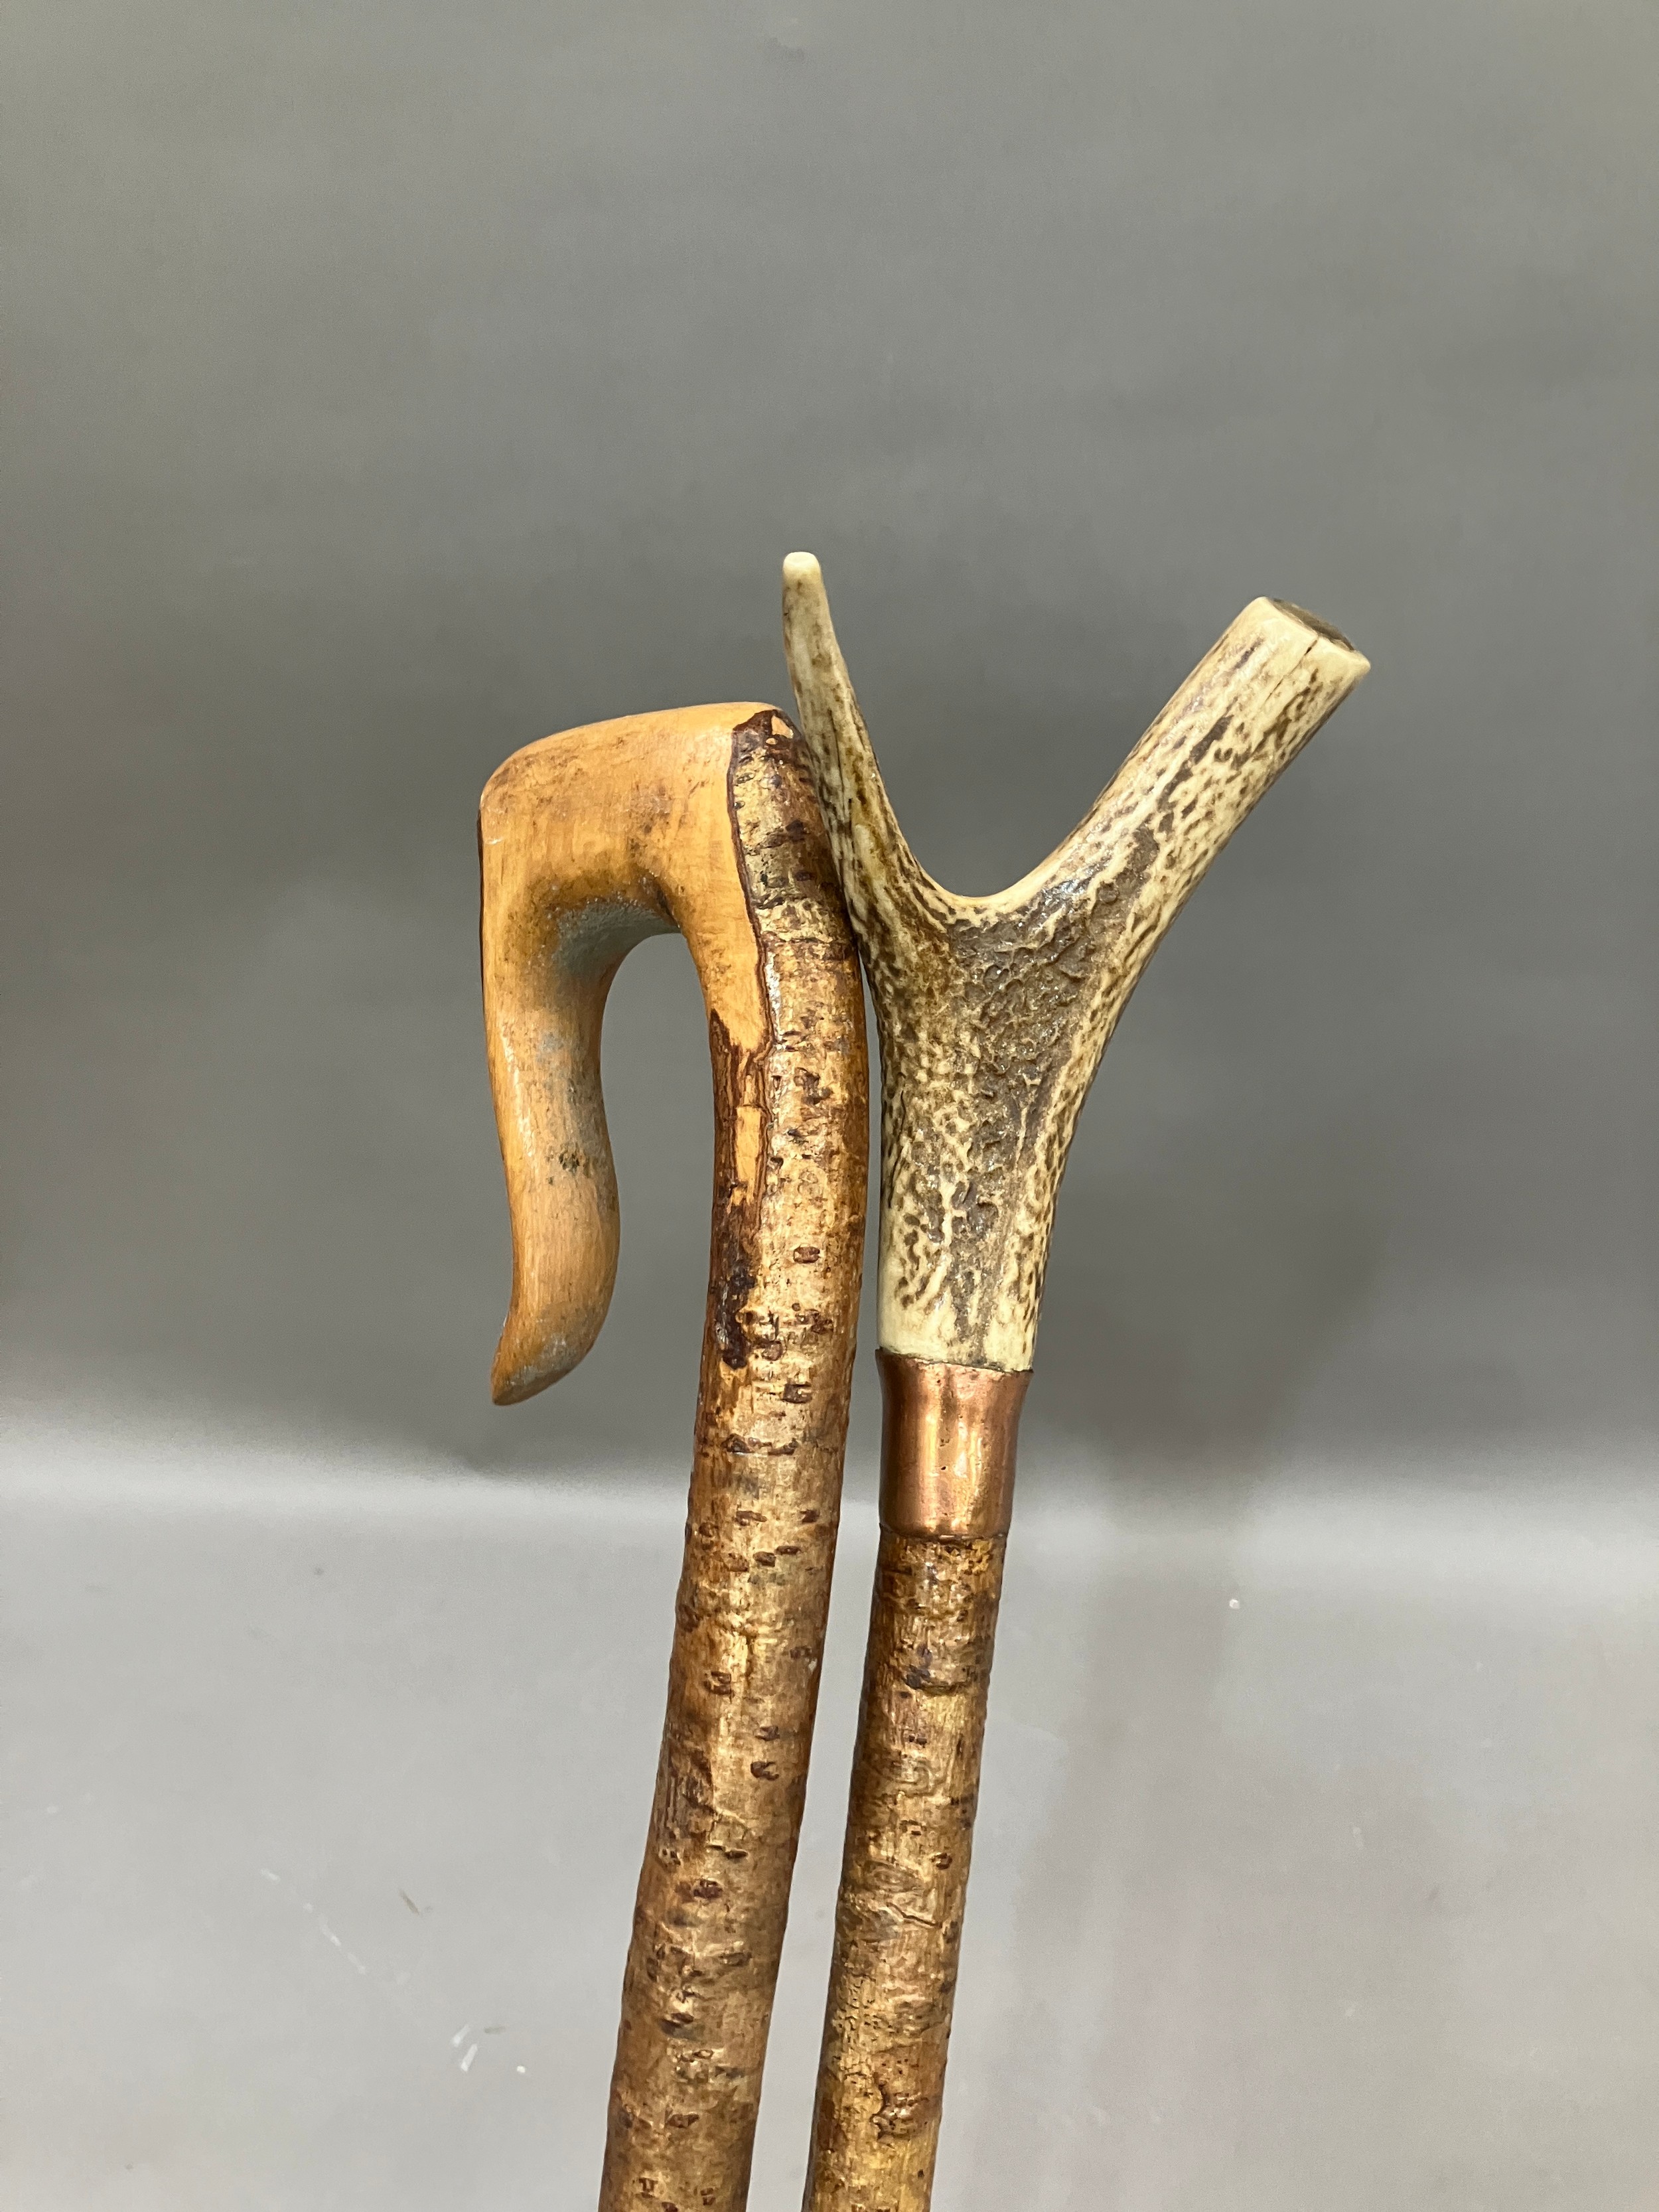 Two walking sticks, one with antler handle the other with crook handle